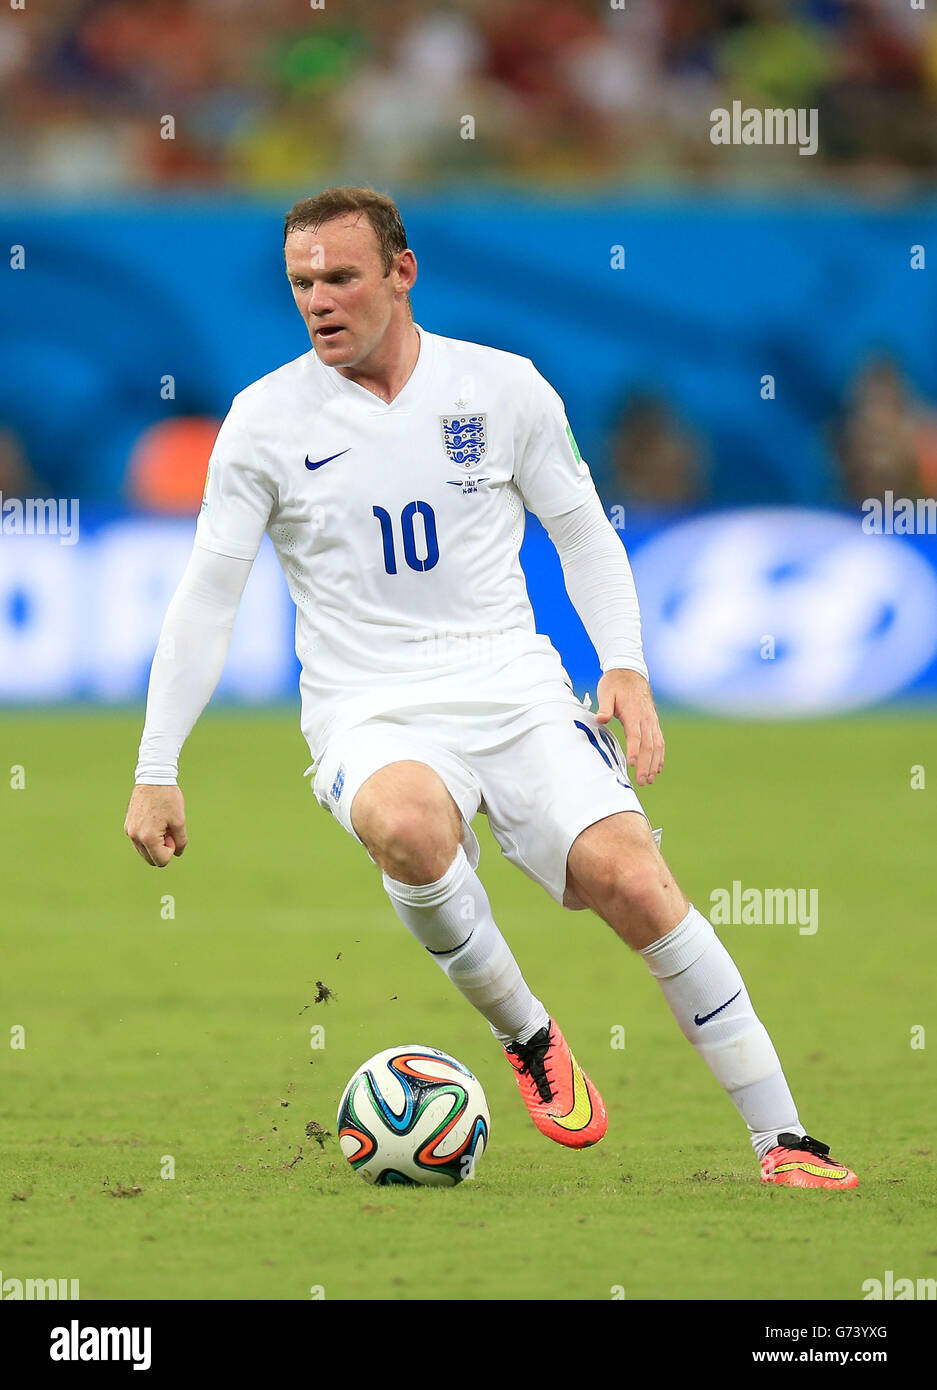 England's Wayne Rooney during the FIFA World Cup, Group D match at the Arena da Amazonia, Manaus, Brazil. PRESS ASSOCIATION Photo. Picture date: Saturday June 14, 2014. See PA story SOCCER England. Photo credit should read: Mike Egerton/PA Wire. Editorial use only. No commercial use. No use with any unofficial 3rd party logos. No manipulation of images. No video emulation Stock Photo